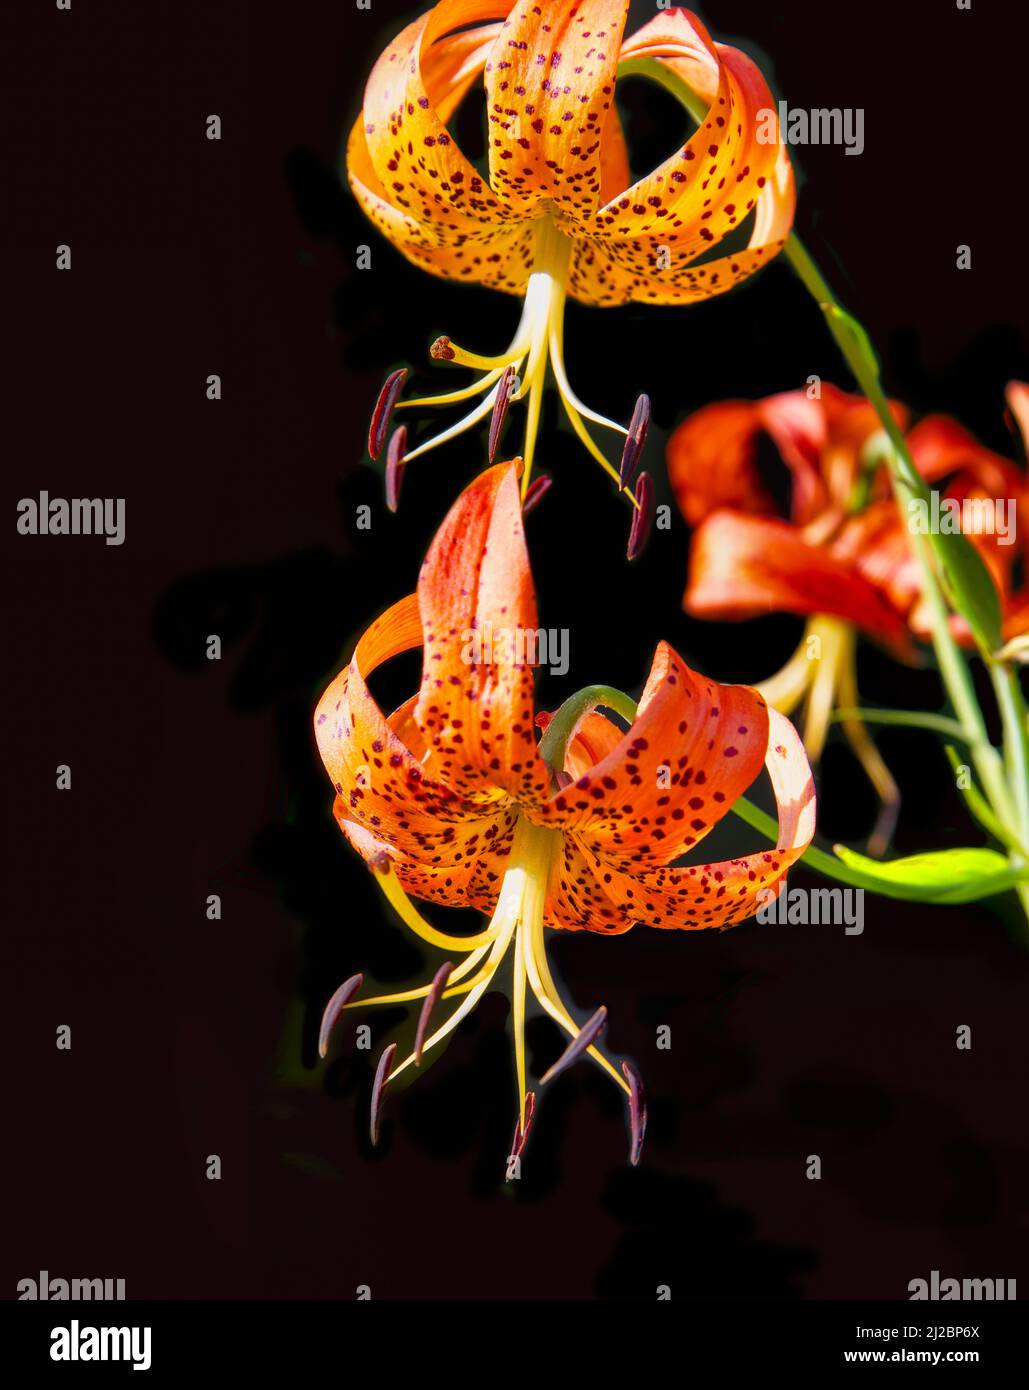 Blooming Tiger Lily flowers, vibrant orange color on a black background Stock Photo